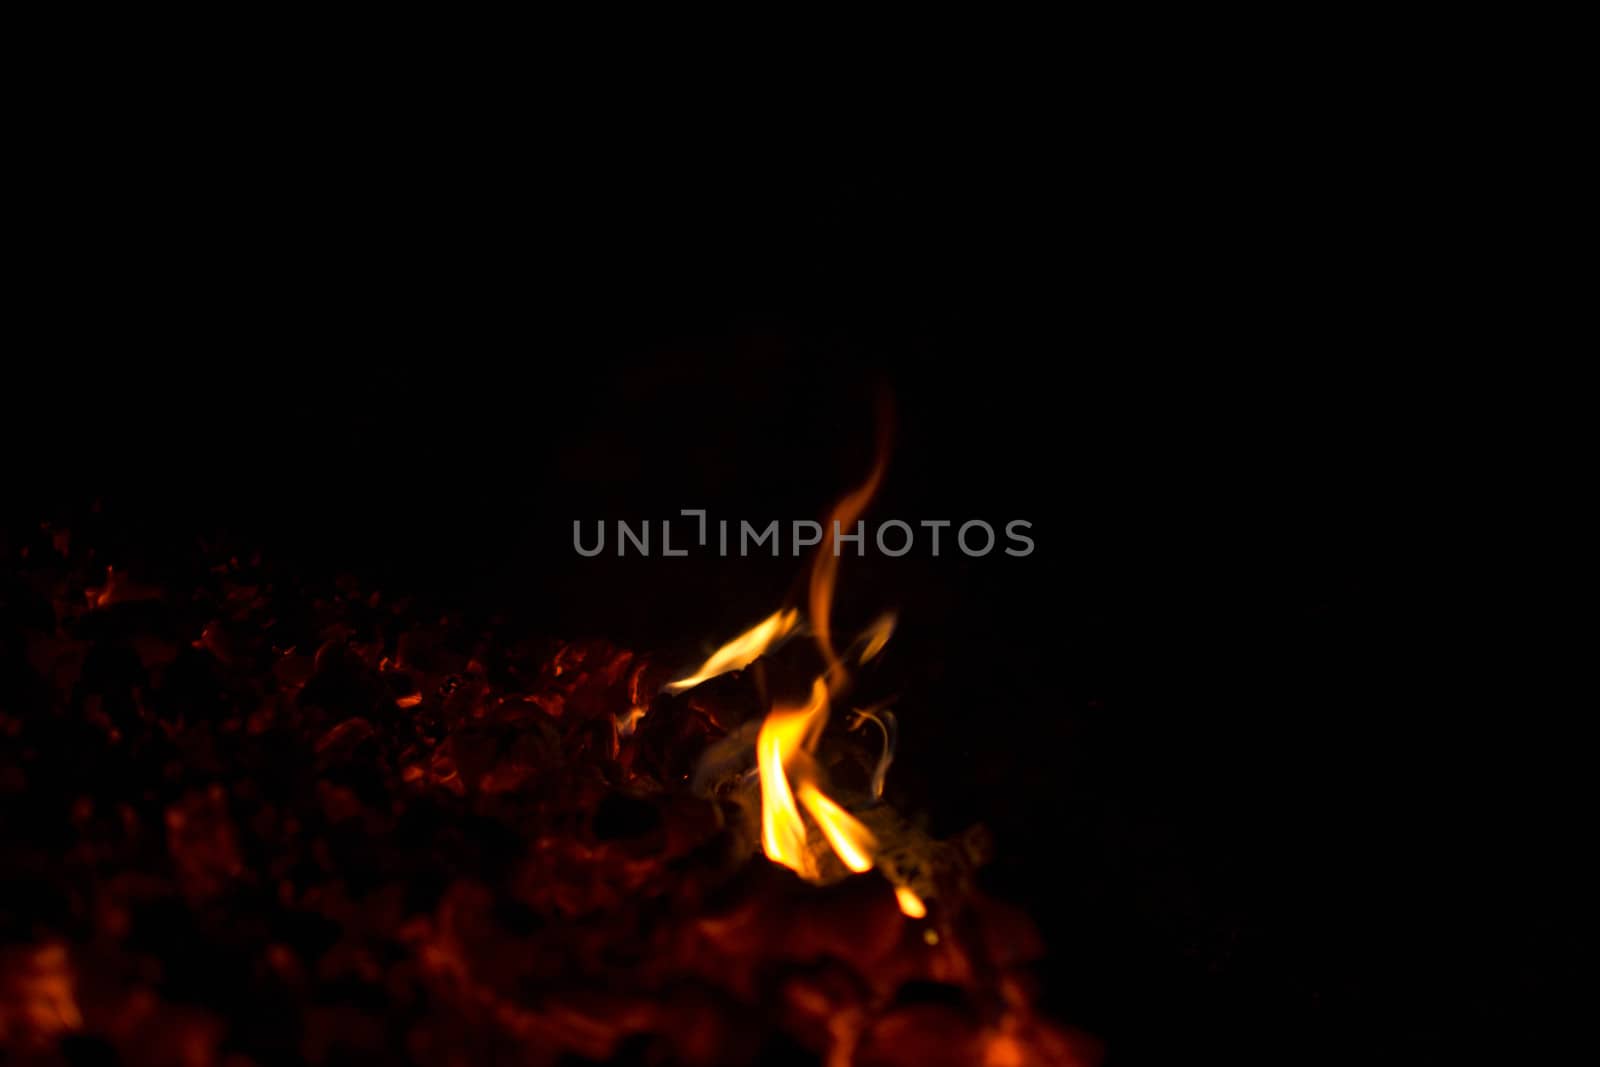 flames from the coals on a black background by Irene1601